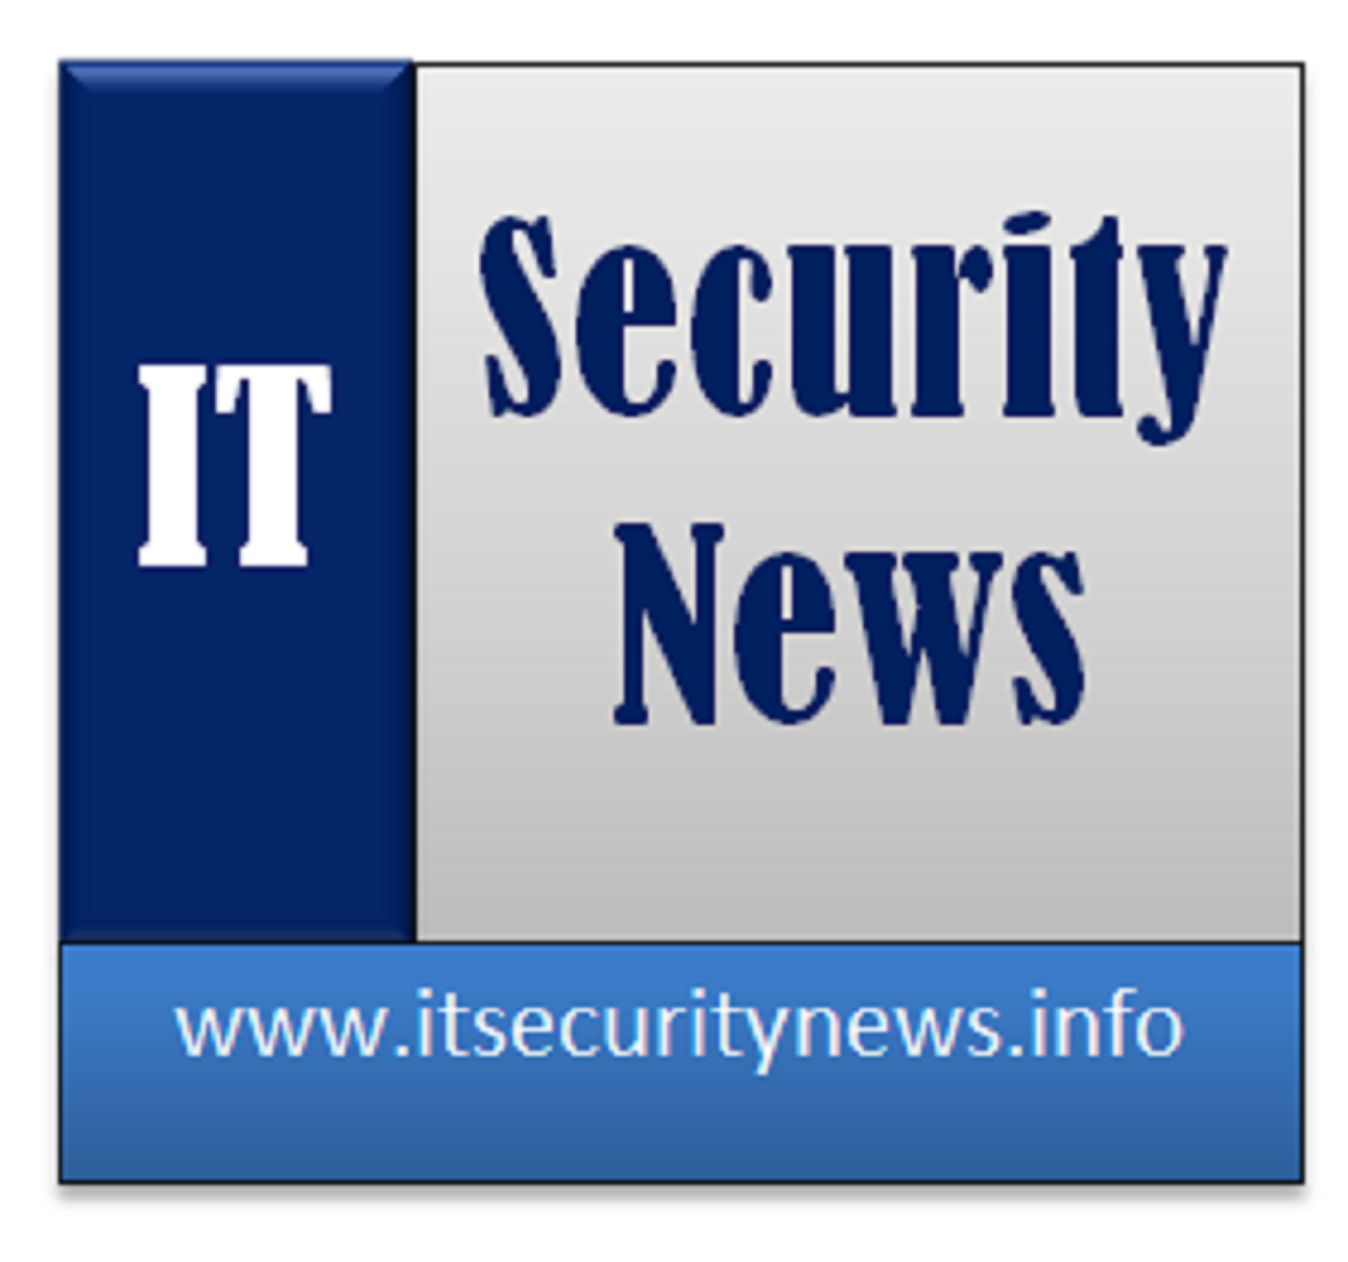 IT Security News for iOS (iPhone and iPad)